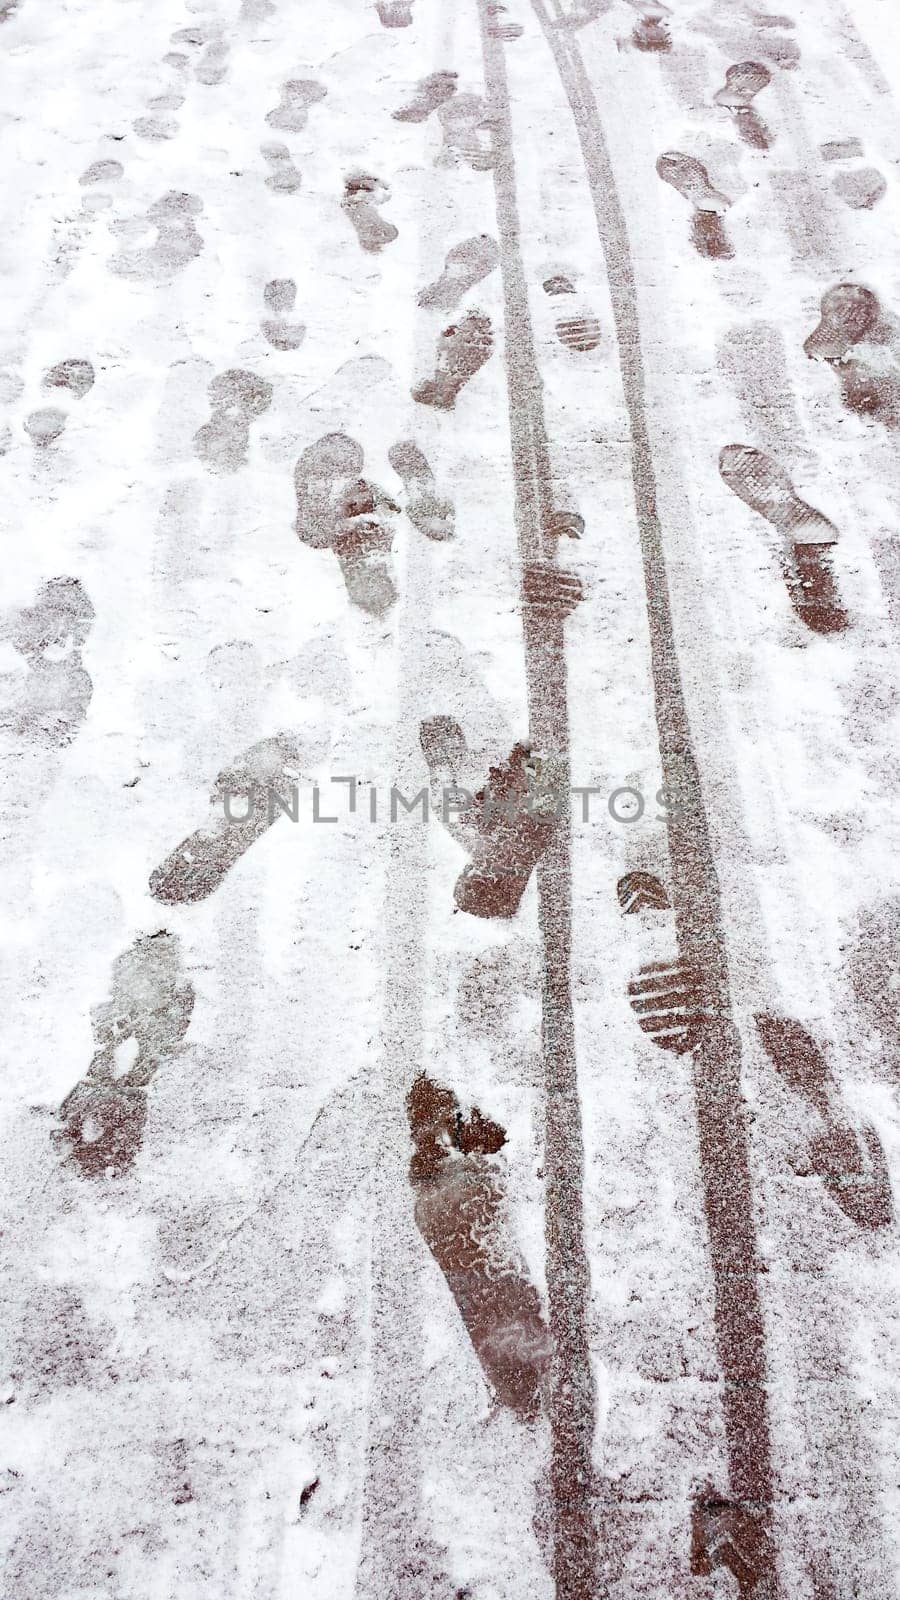 Footprints and tire tracks on a snowy surface, depicting winter travel and activity.